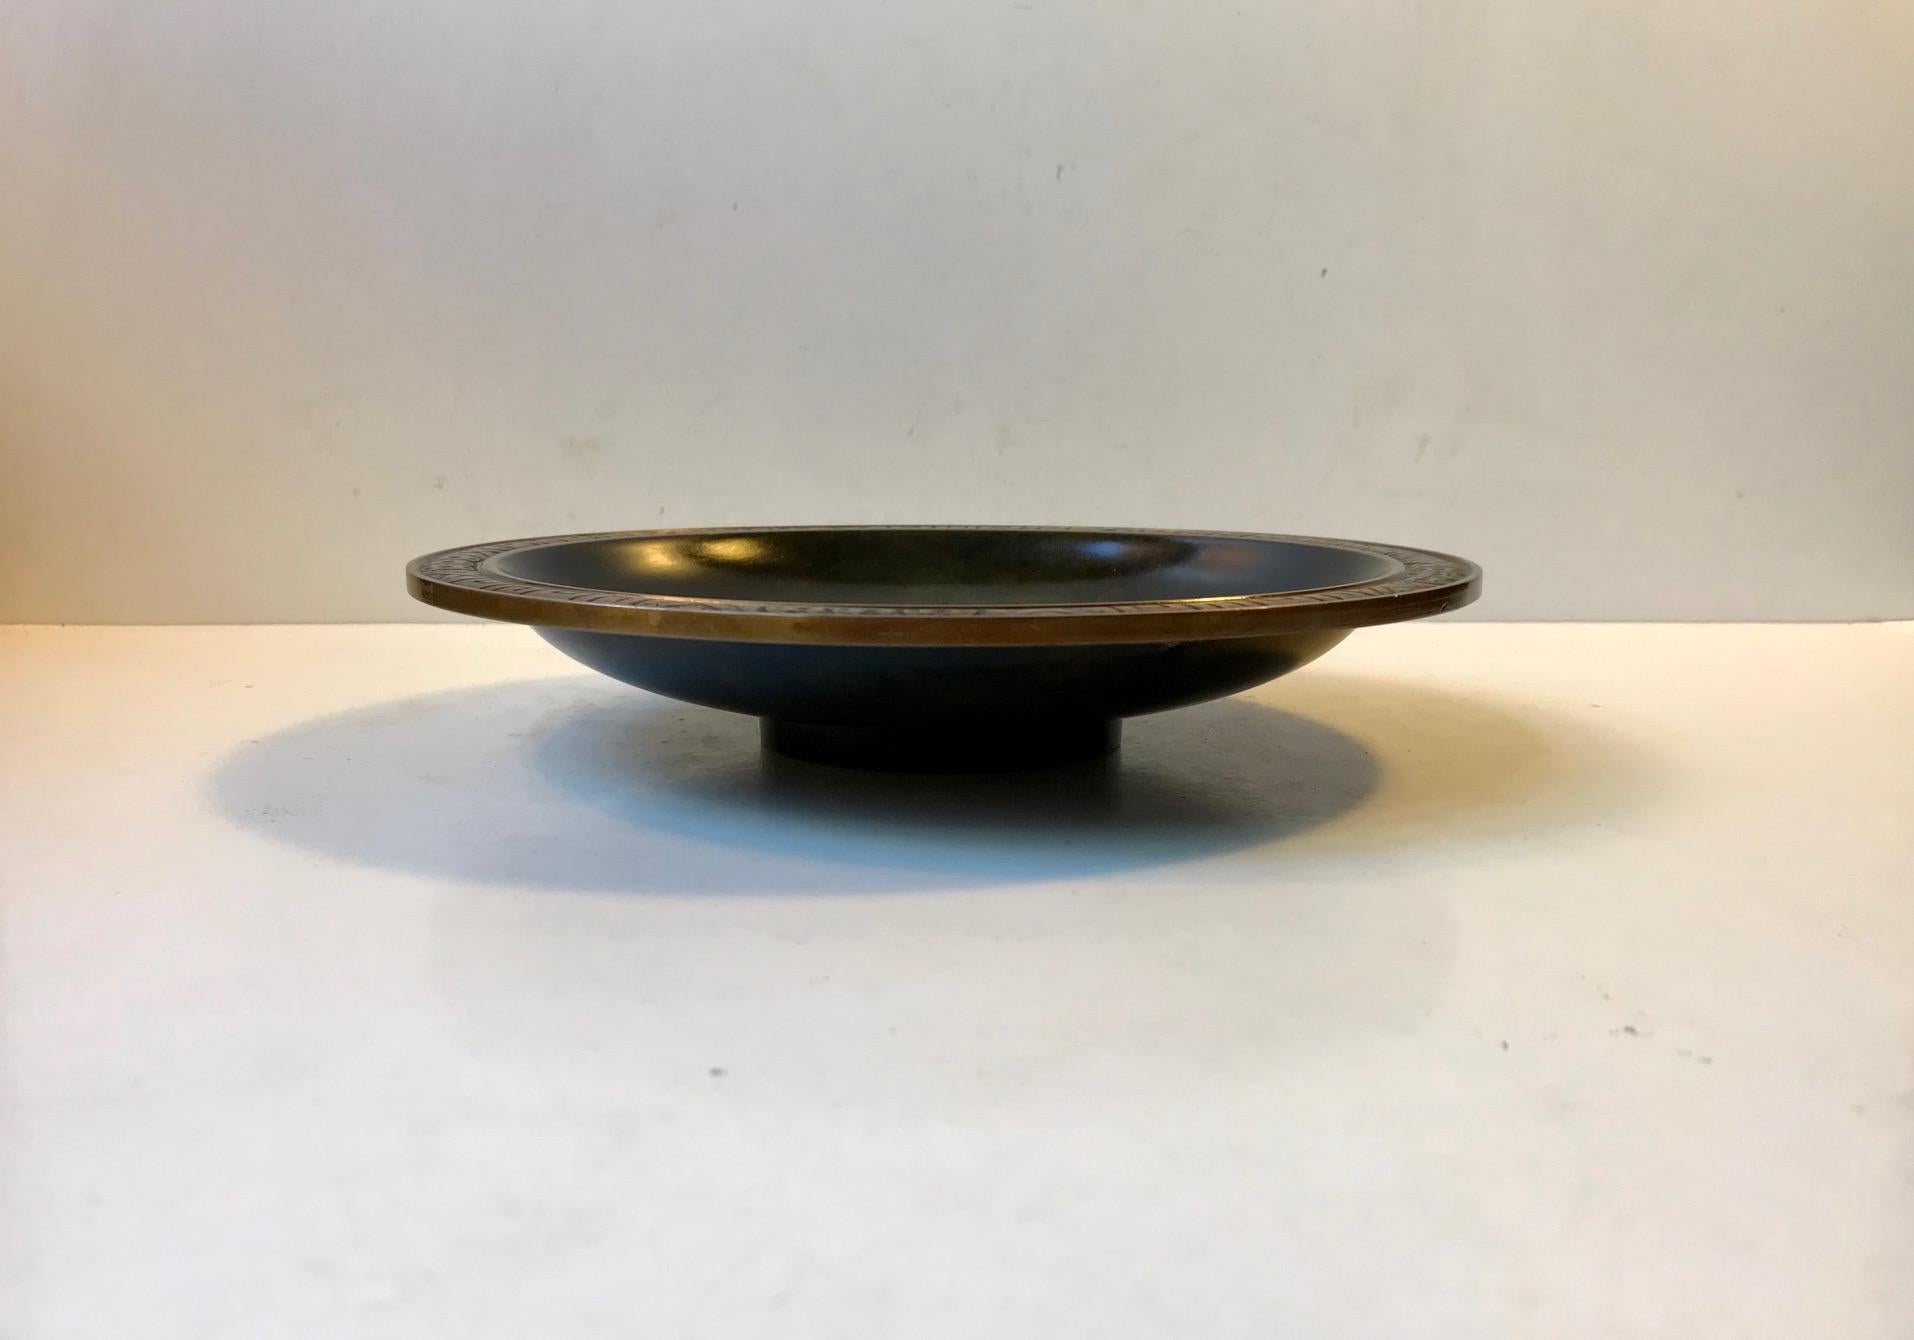 Thick and heavy low pedestal bronze bowl with green verdigris patina. Designed and manufactured by Krone Bronce (Crown Bronze) in Denmark during the 1920s. This manufacturer was supplier to the Royal Danish Court and the quality is superior to